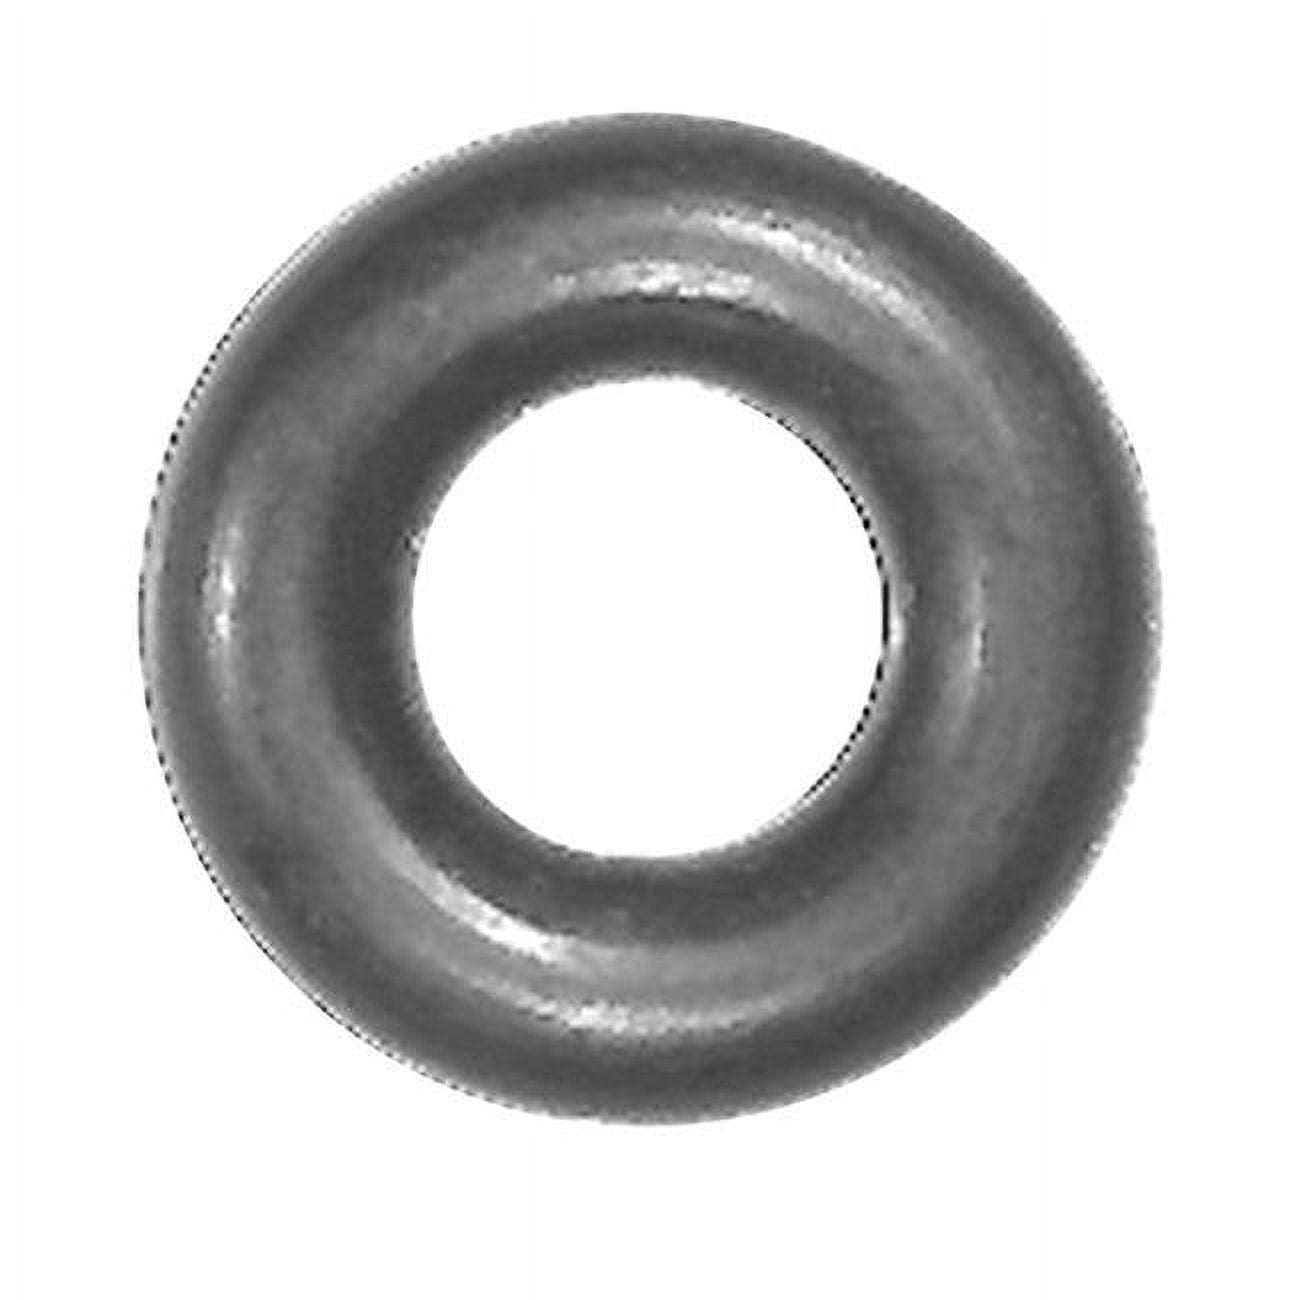 35870b 0.5 X 0.25 X 0.12 In. O-ring Faucet- Pack Of 5